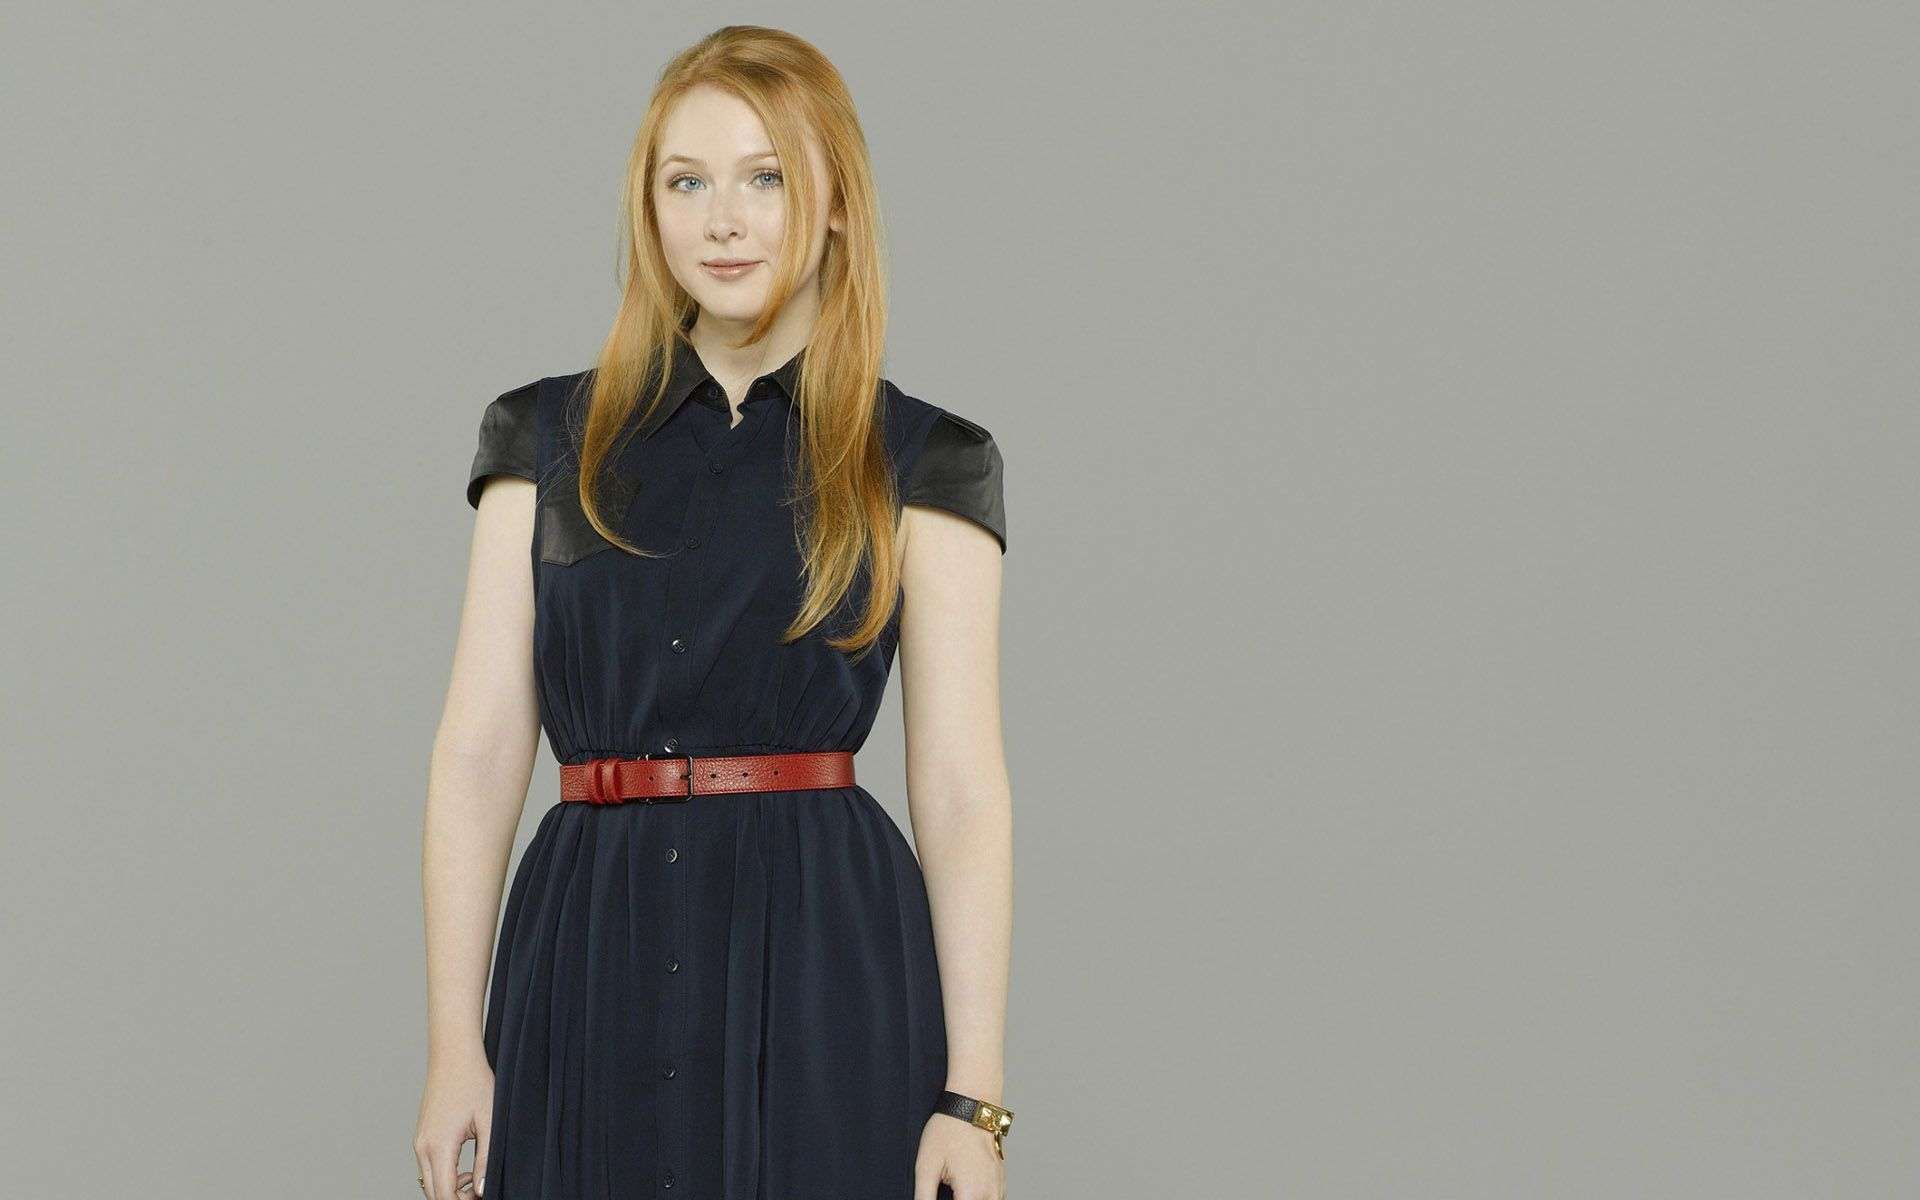 Molly C Quinn Wallpaper Image Photos Pictures Background